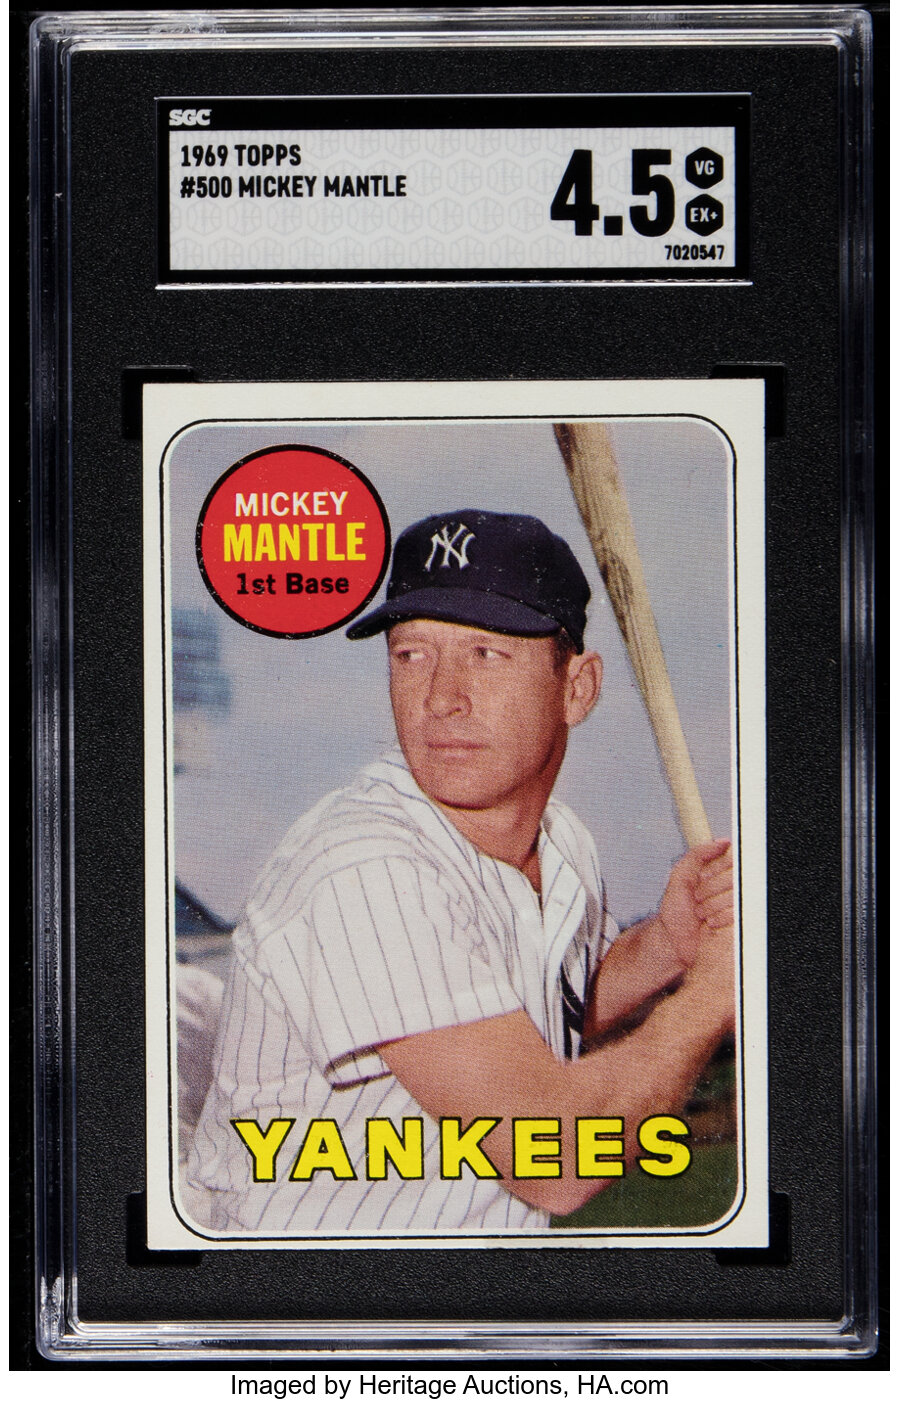 1969 Topps Mickey Mantle (Last Name In Yellow) #500 SGC VG/EX+ 4.5